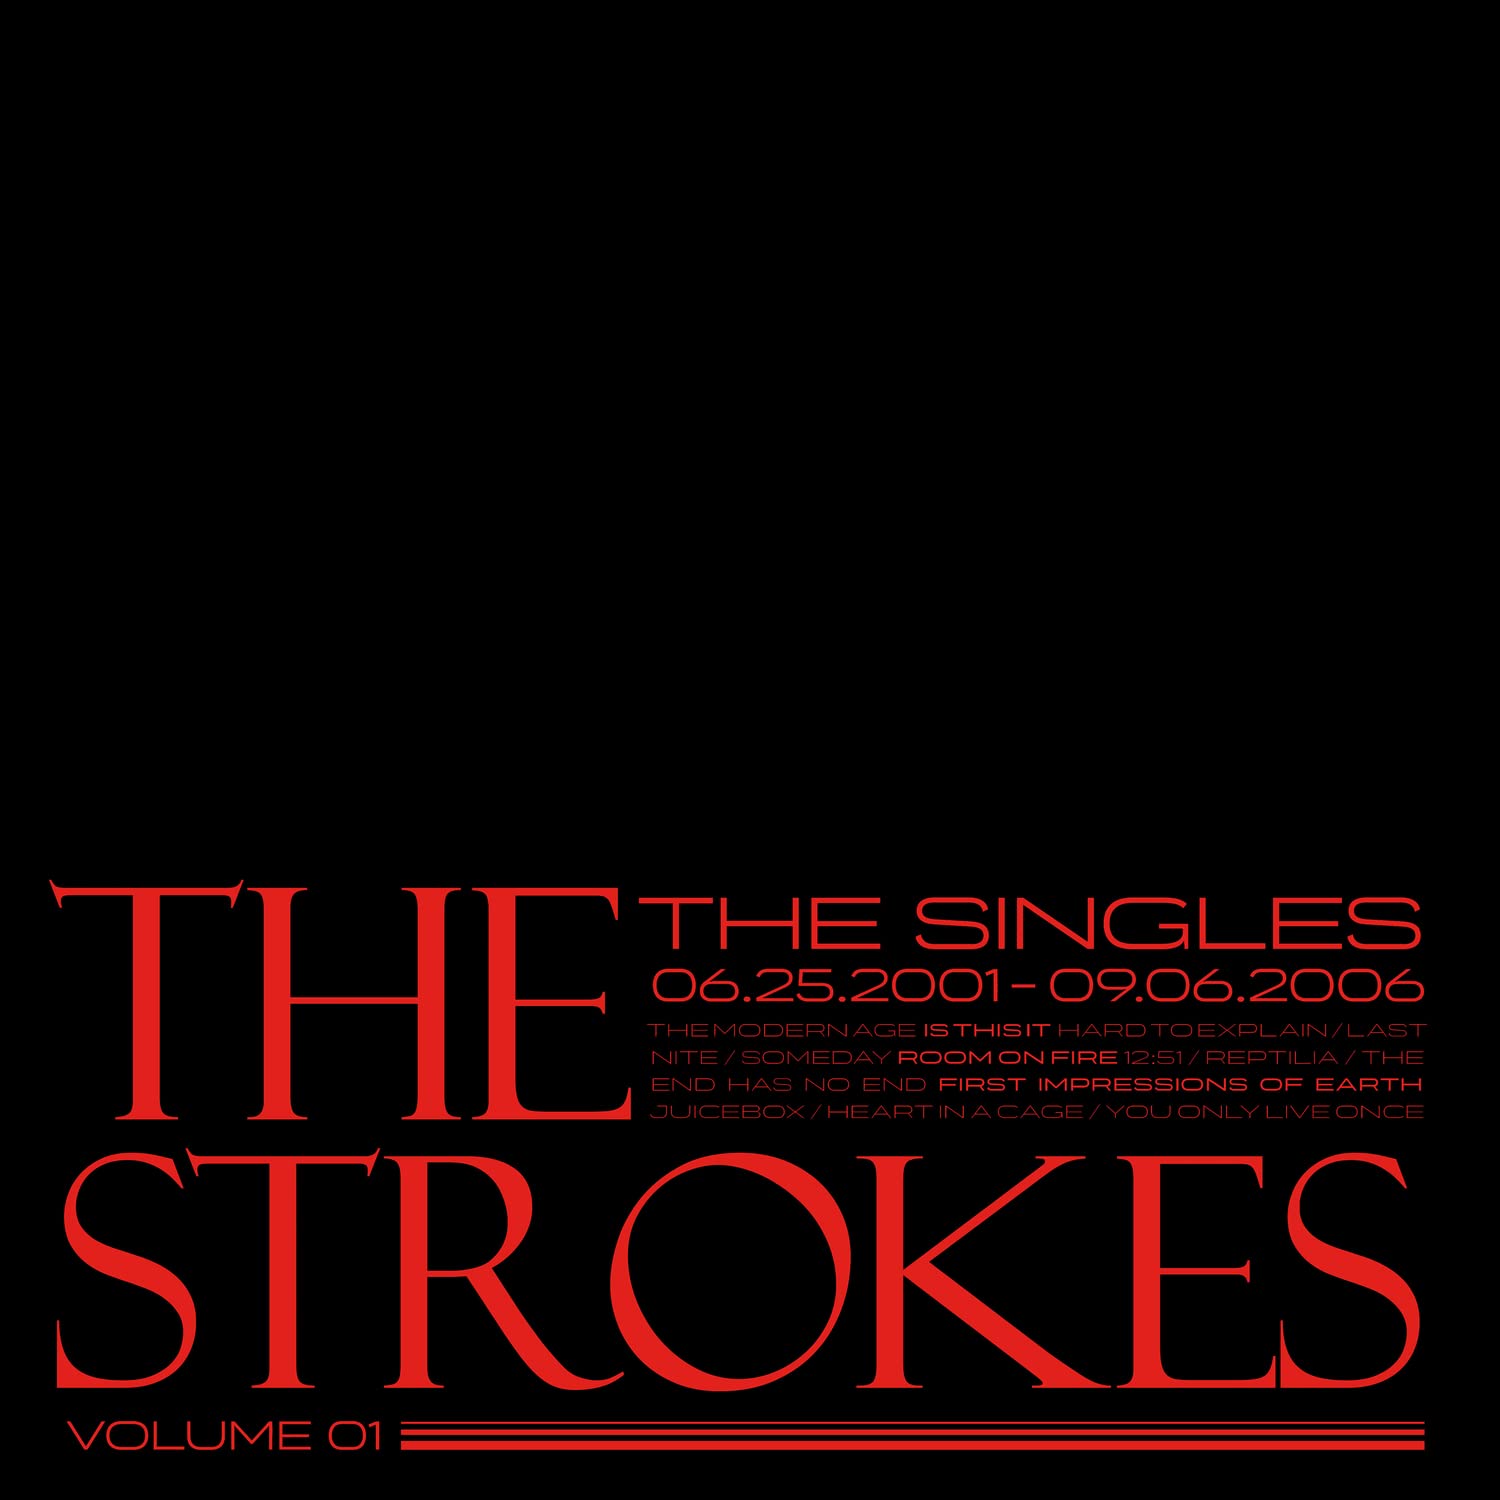 News – The Strokes – The Singles – Volume 01 – The Modern Age (Rough Trade Version)